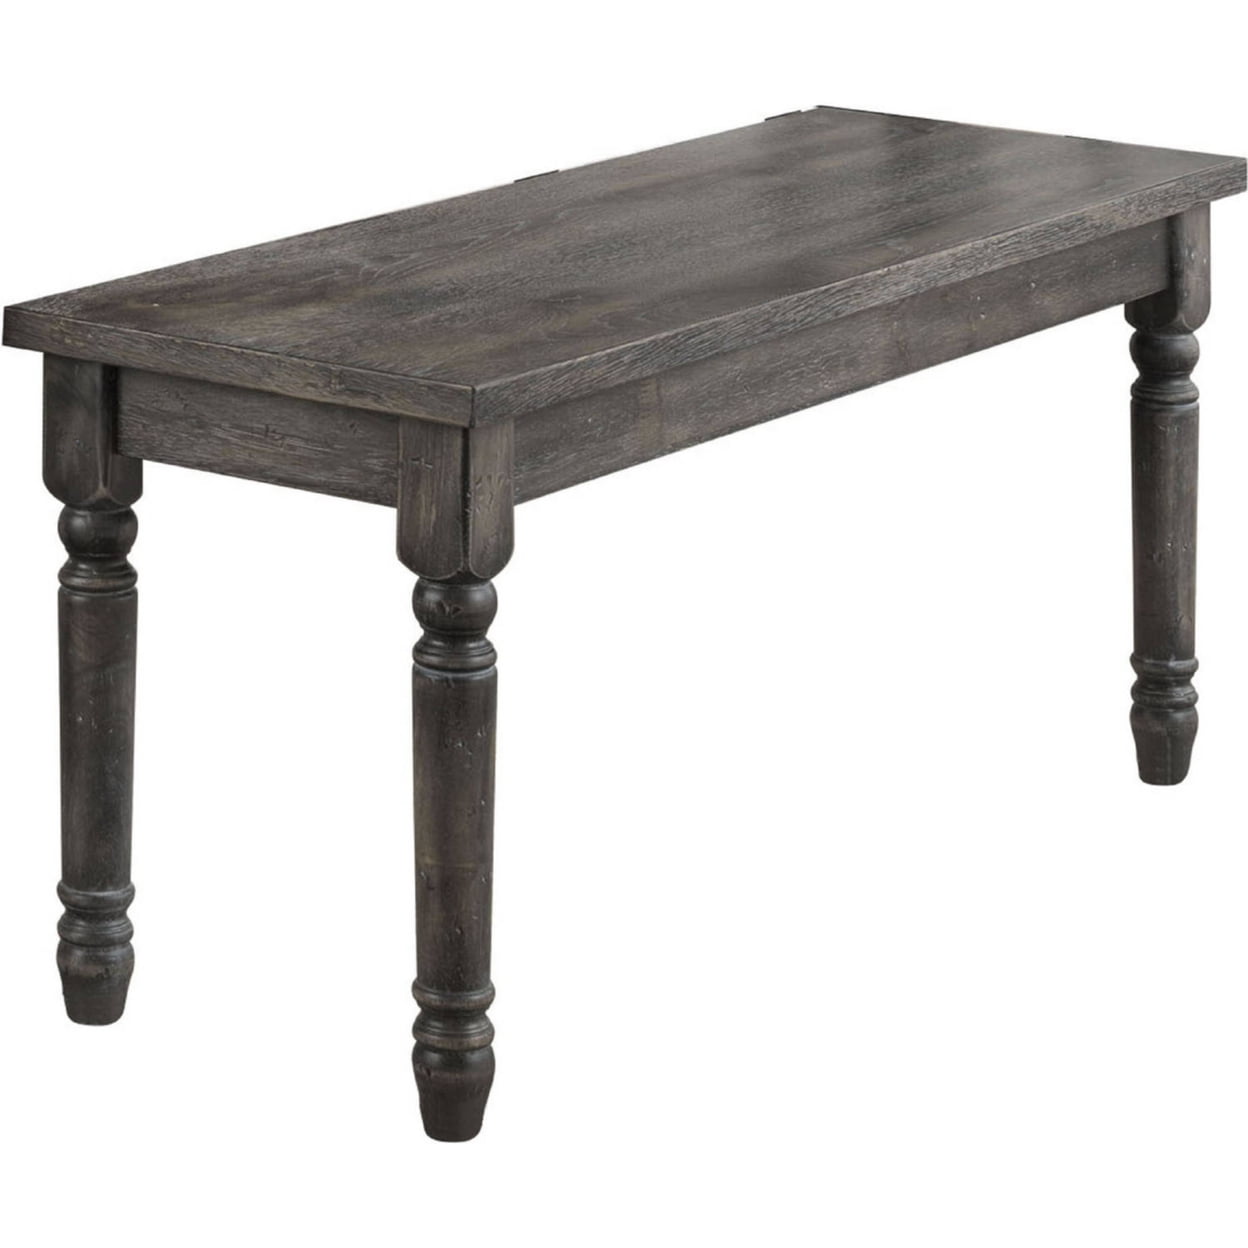 Picture of ACME 71438 Wallace Bench, Weathered Gray - 18 x 40 x 14 in.